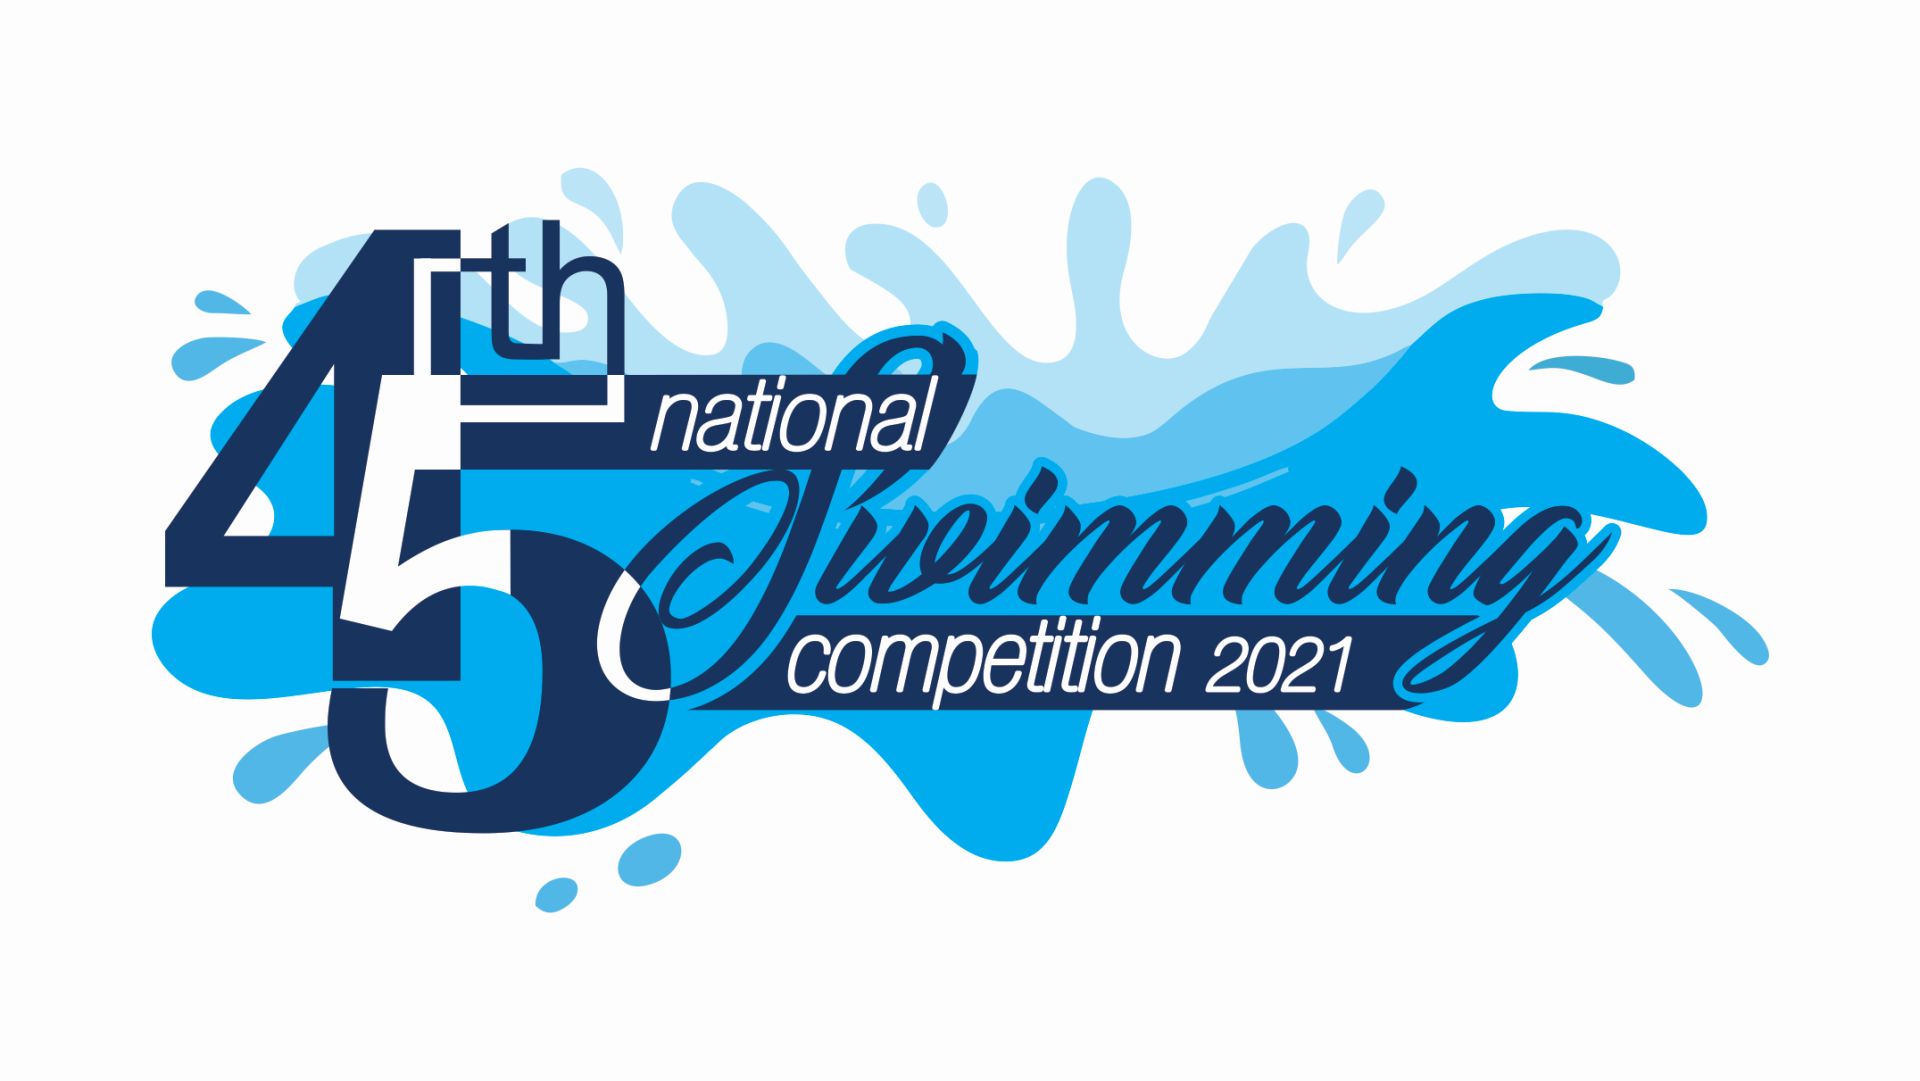 45th National Swimming Competition